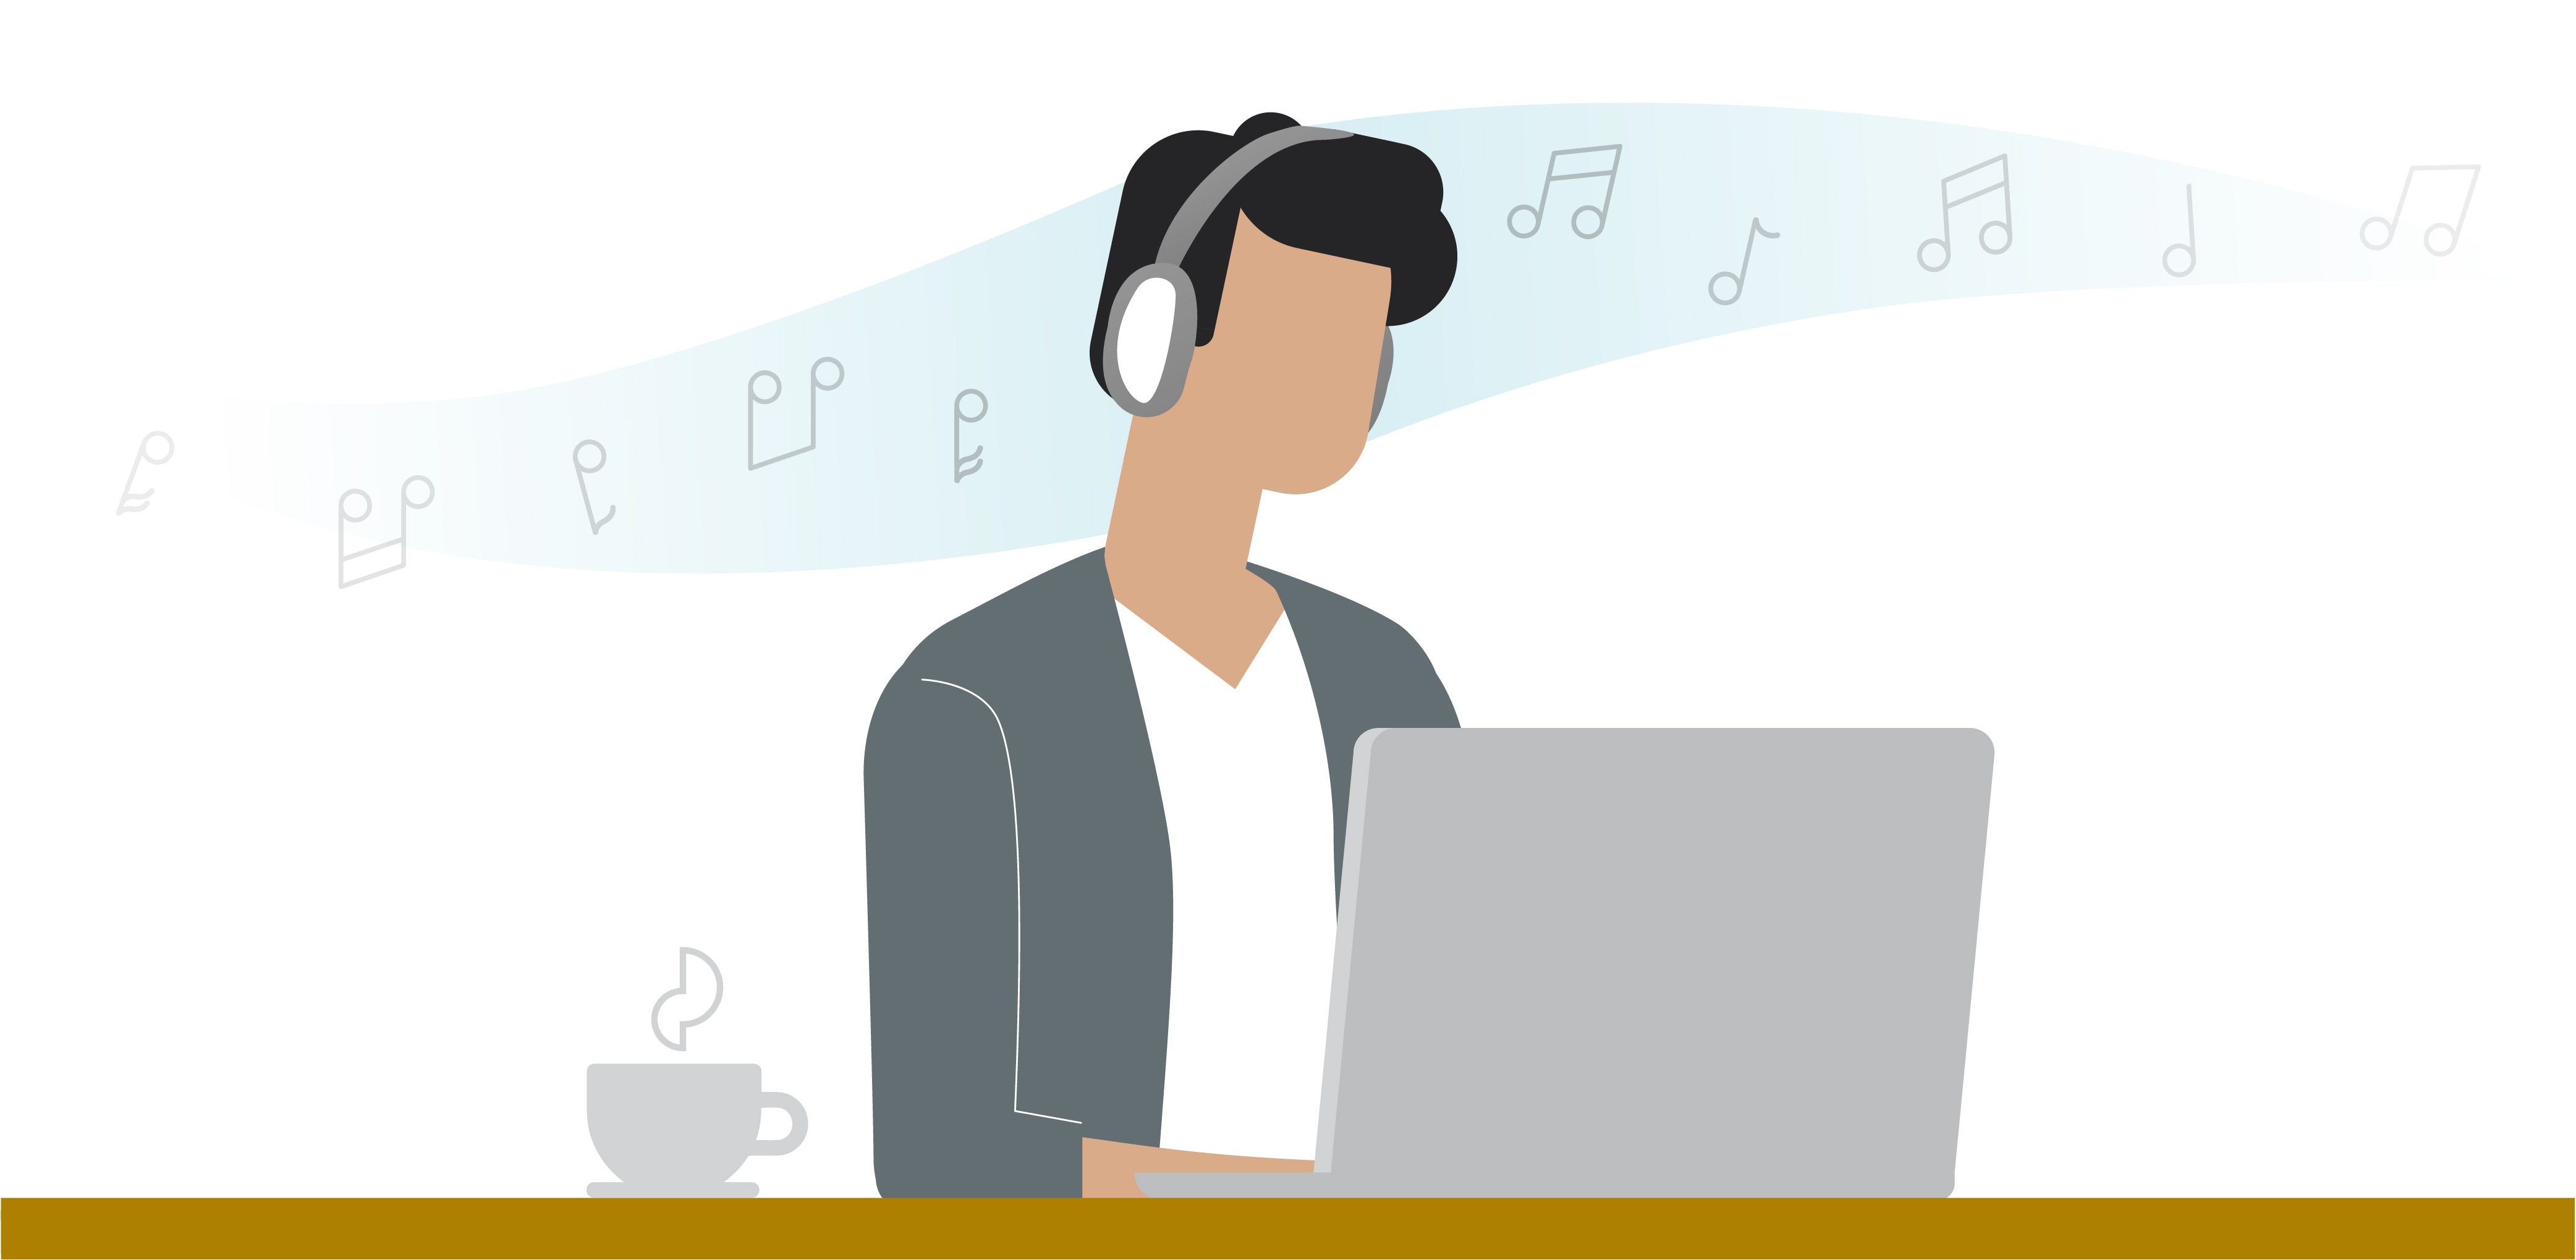 Listening to Music - How to Overcome Stress at Work | Nespresso Professional Singapore